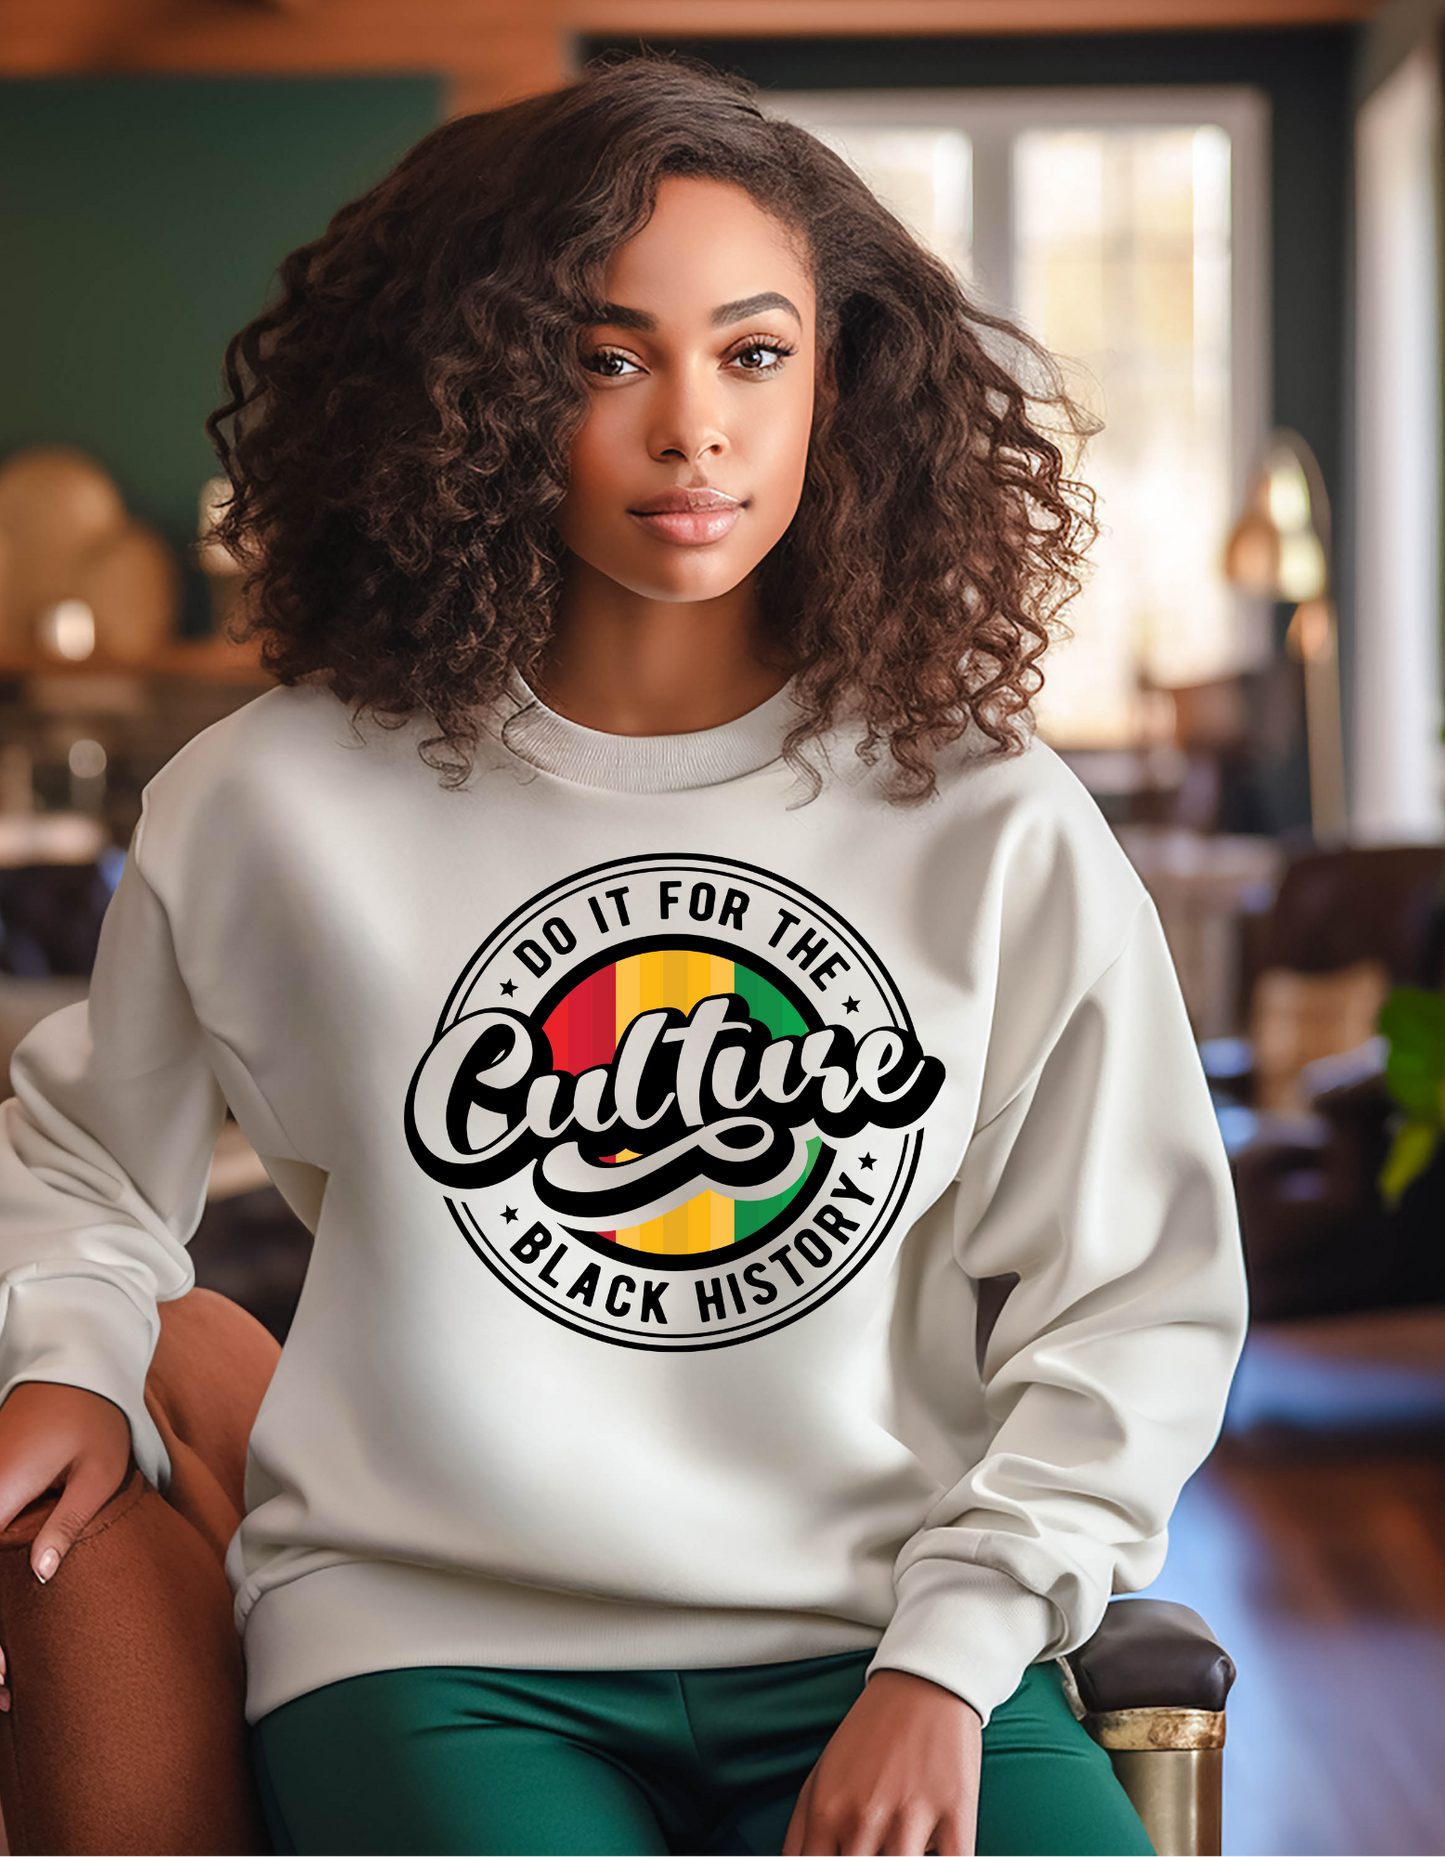 Do It For The Culture T-shirt, Black History Shirts, Juneteenth Graphic Shirt